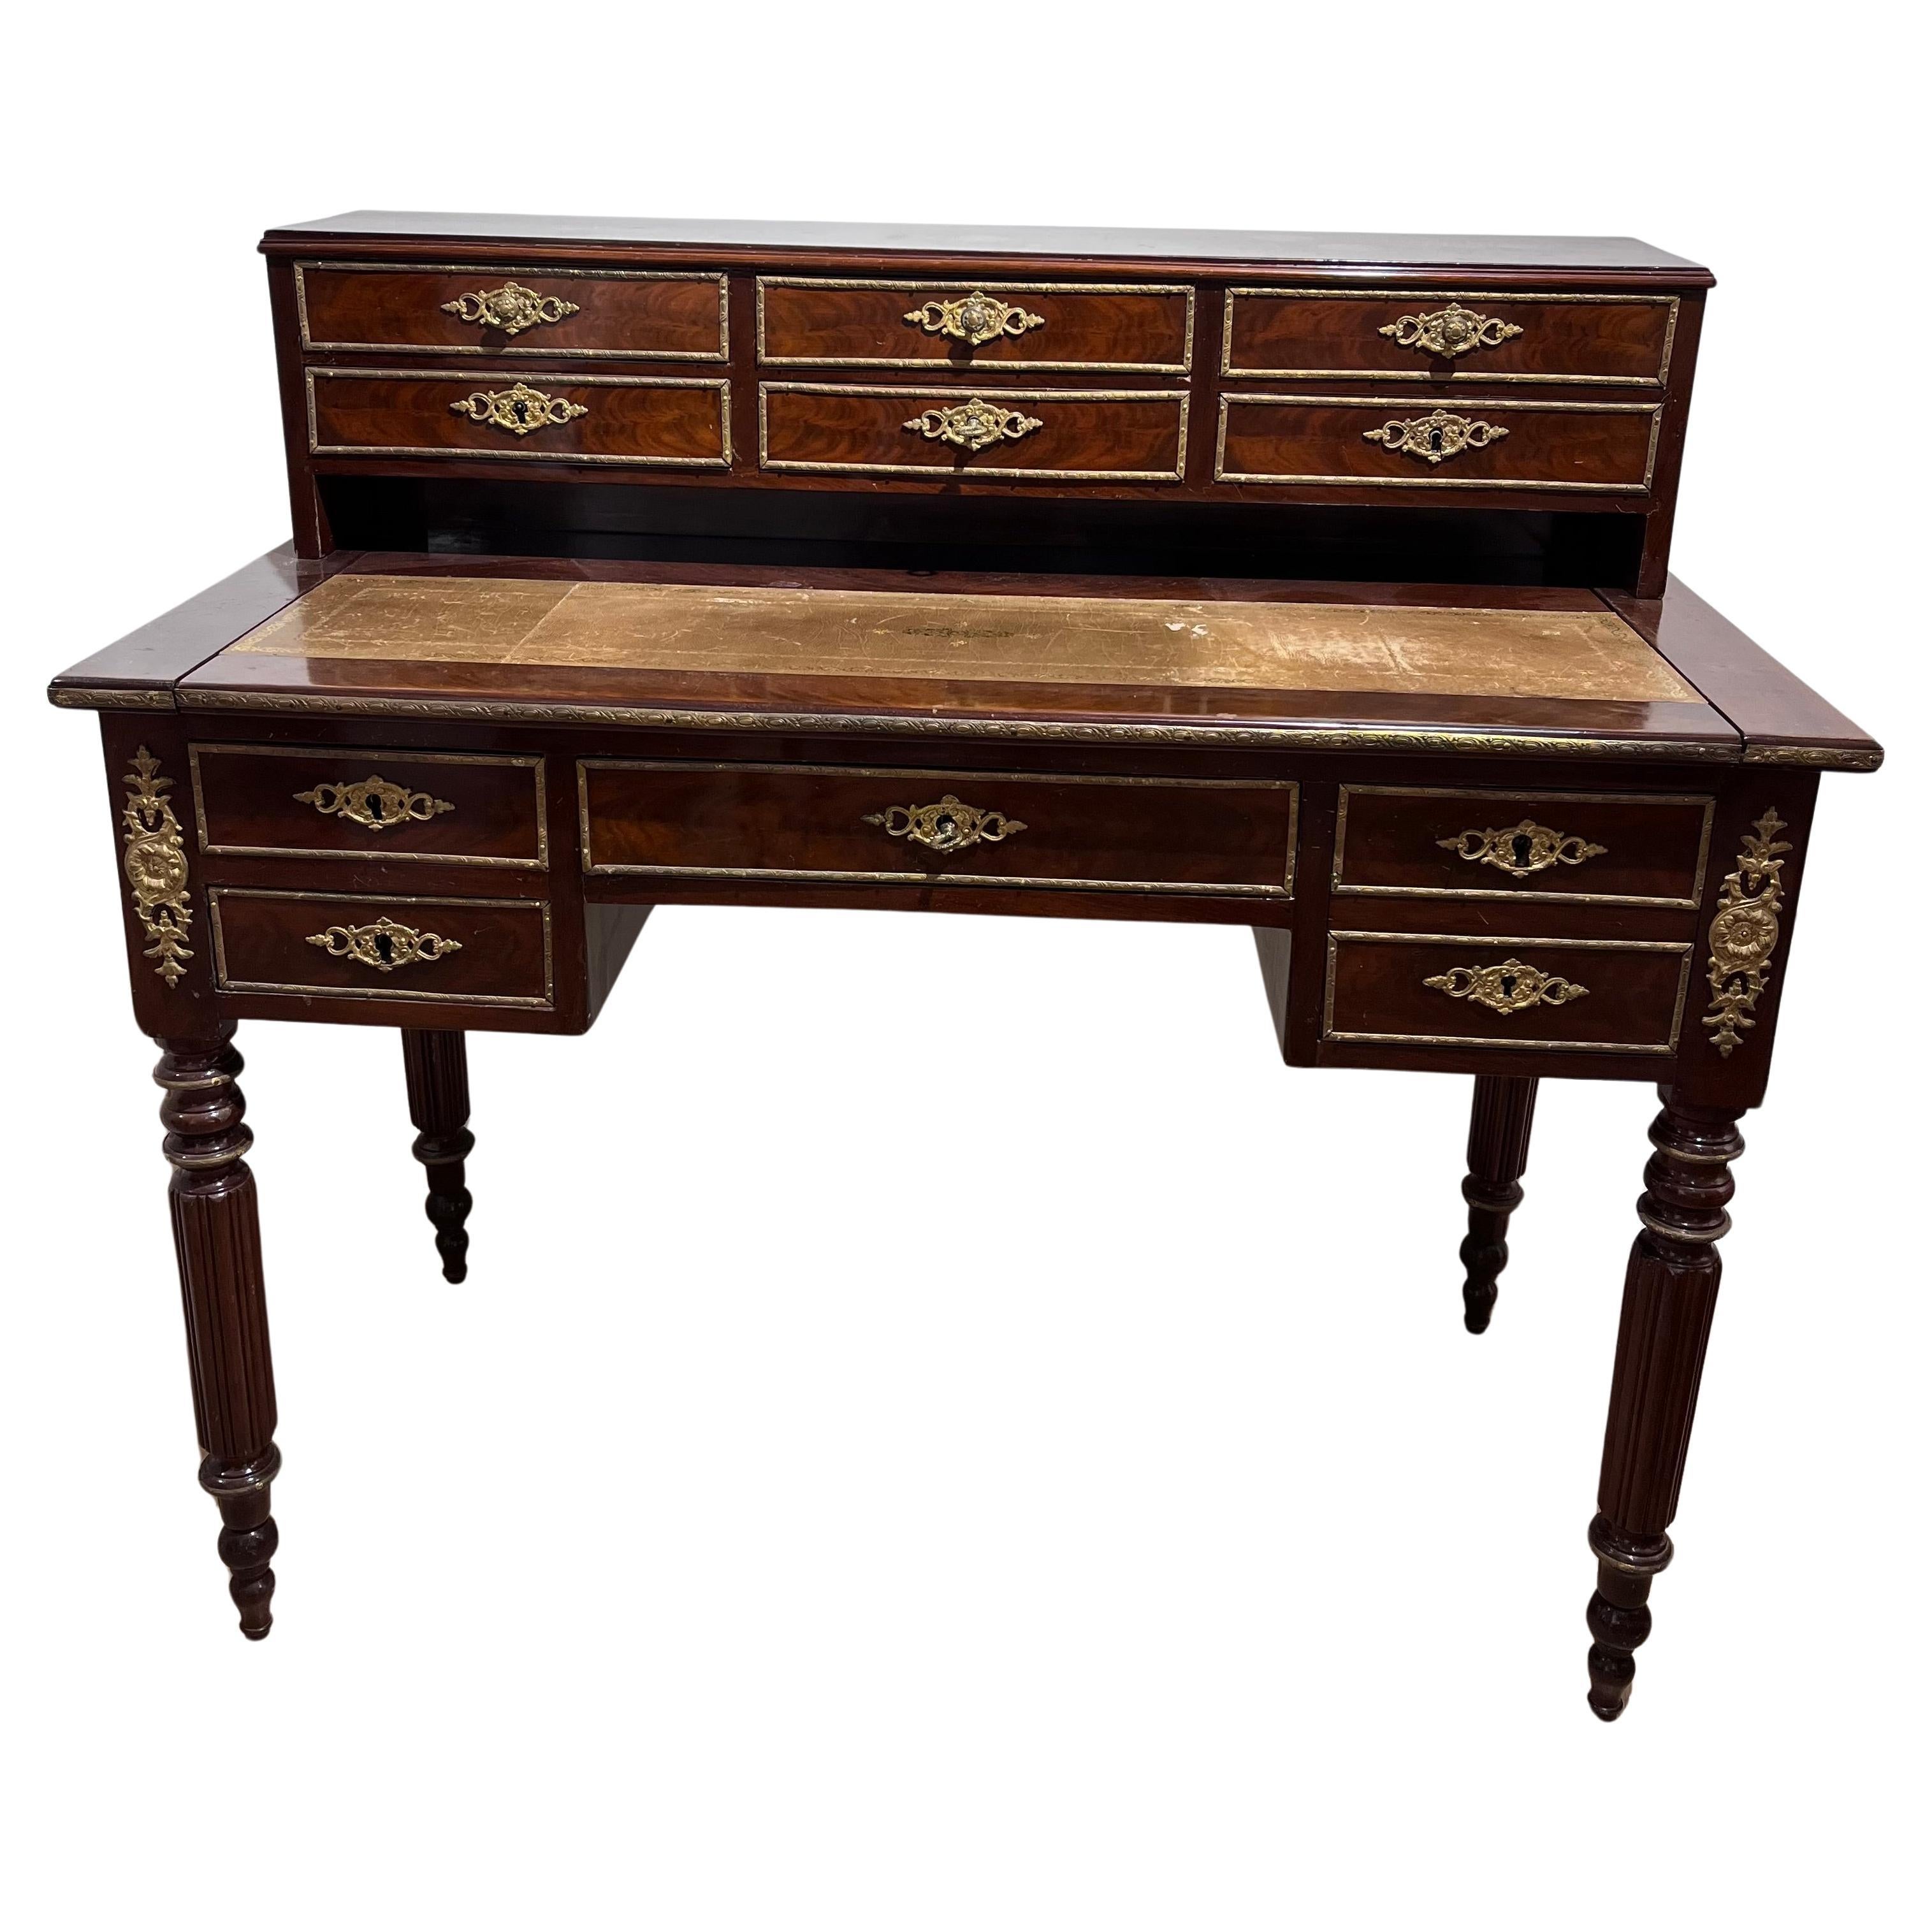 Mahogany Centrepiece Desk with Drawers France 19th Century